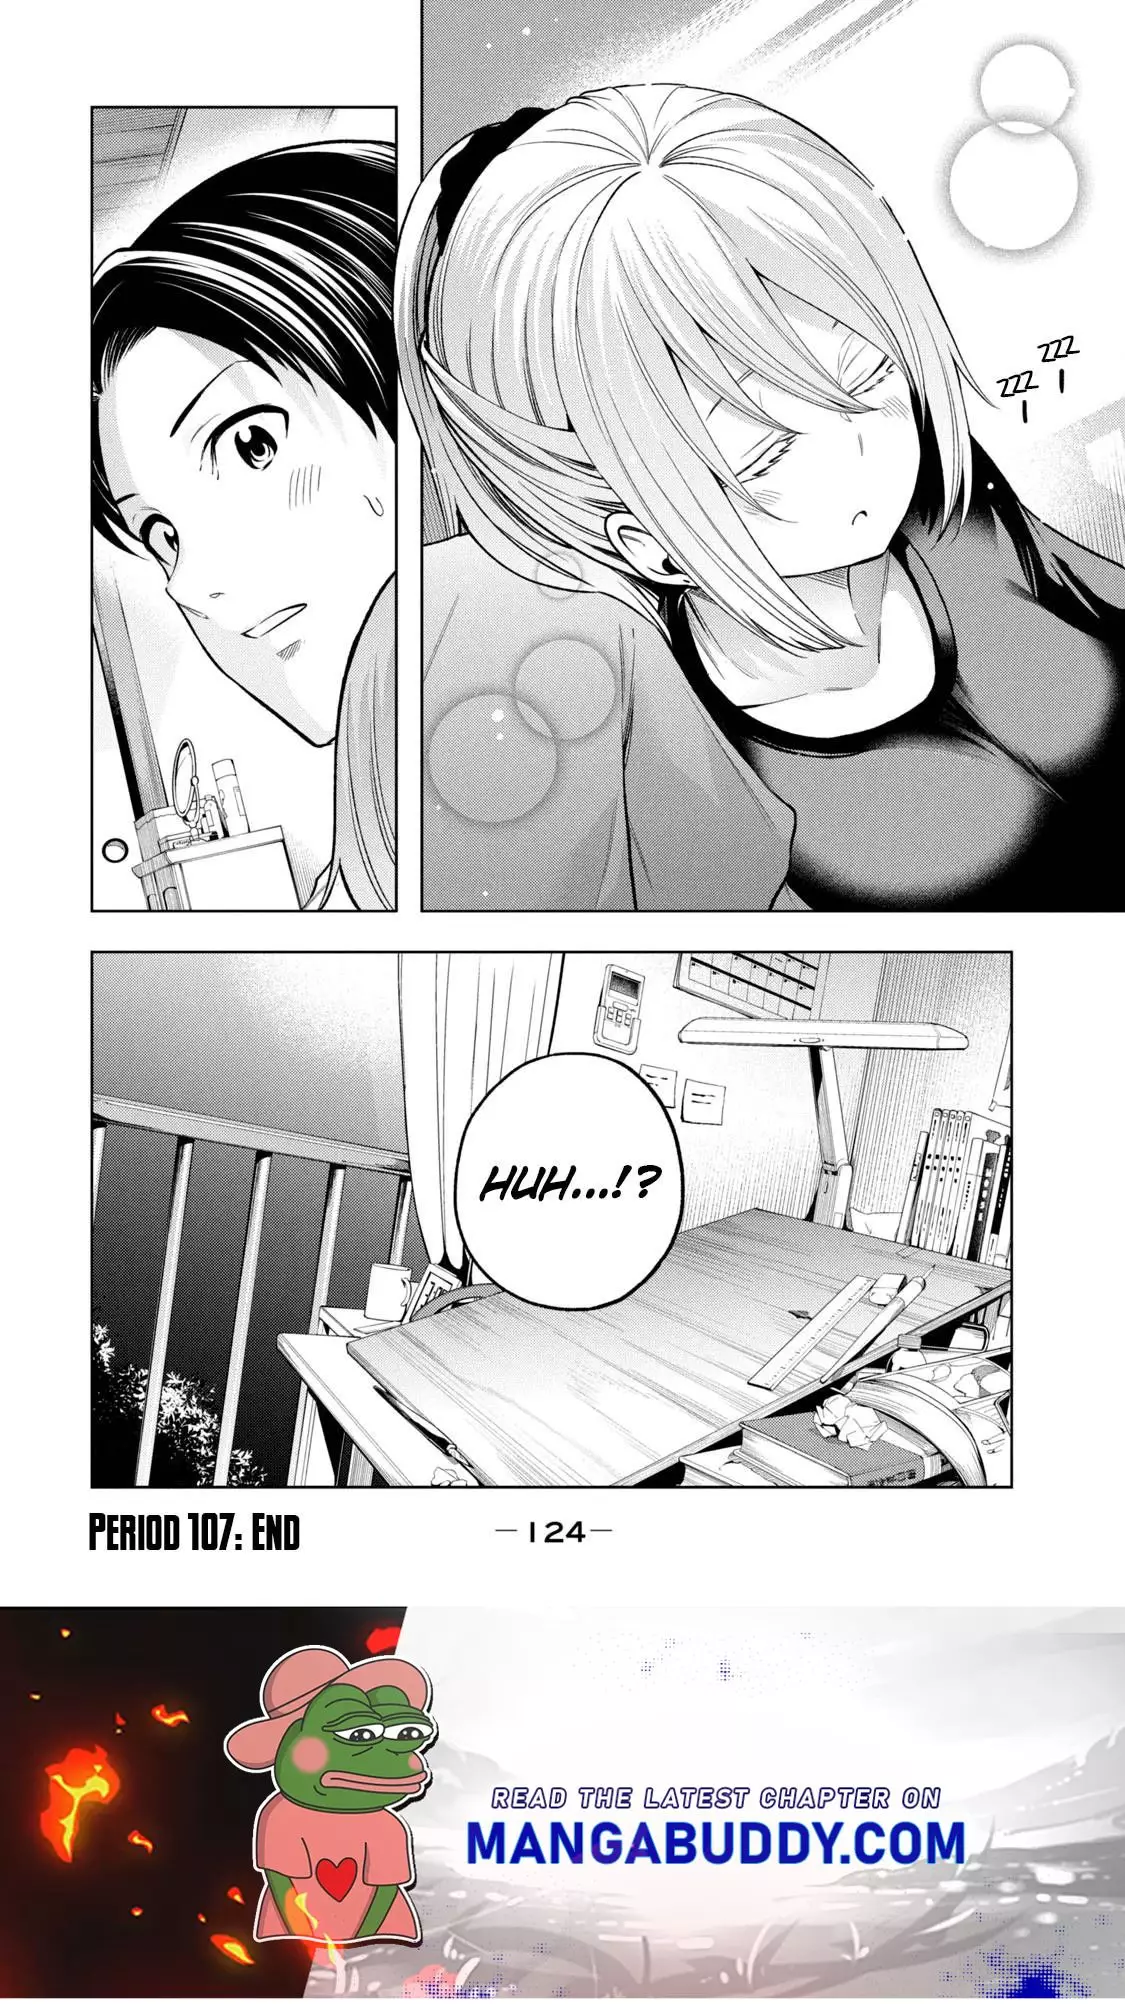 Why are you here Sensei!? - 107 page 16-2d2c2d69